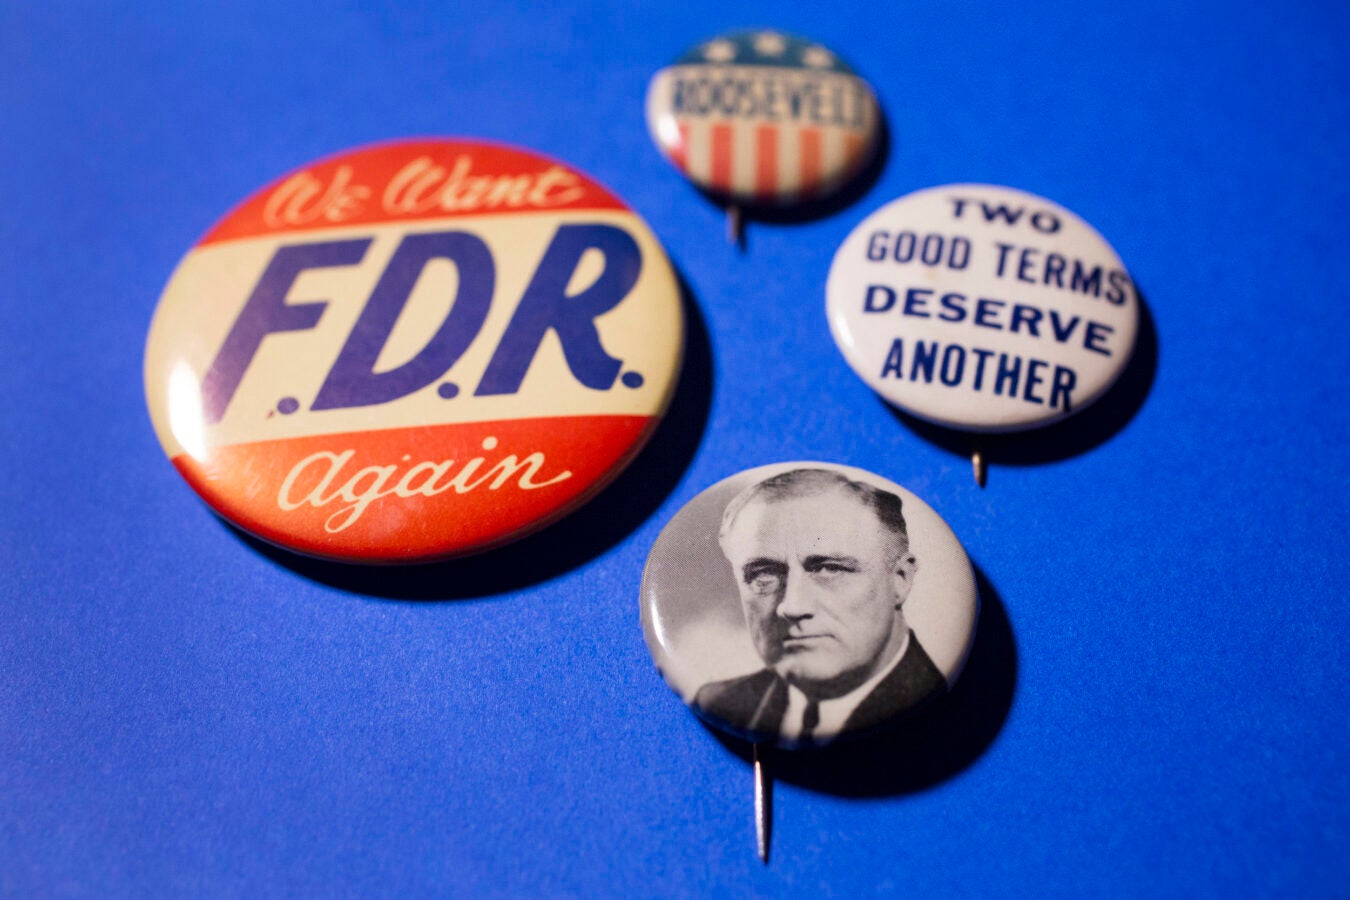 Campaign buttons for Franklin Delano Roosevelt, the only U.S. president to serve more than two terms.